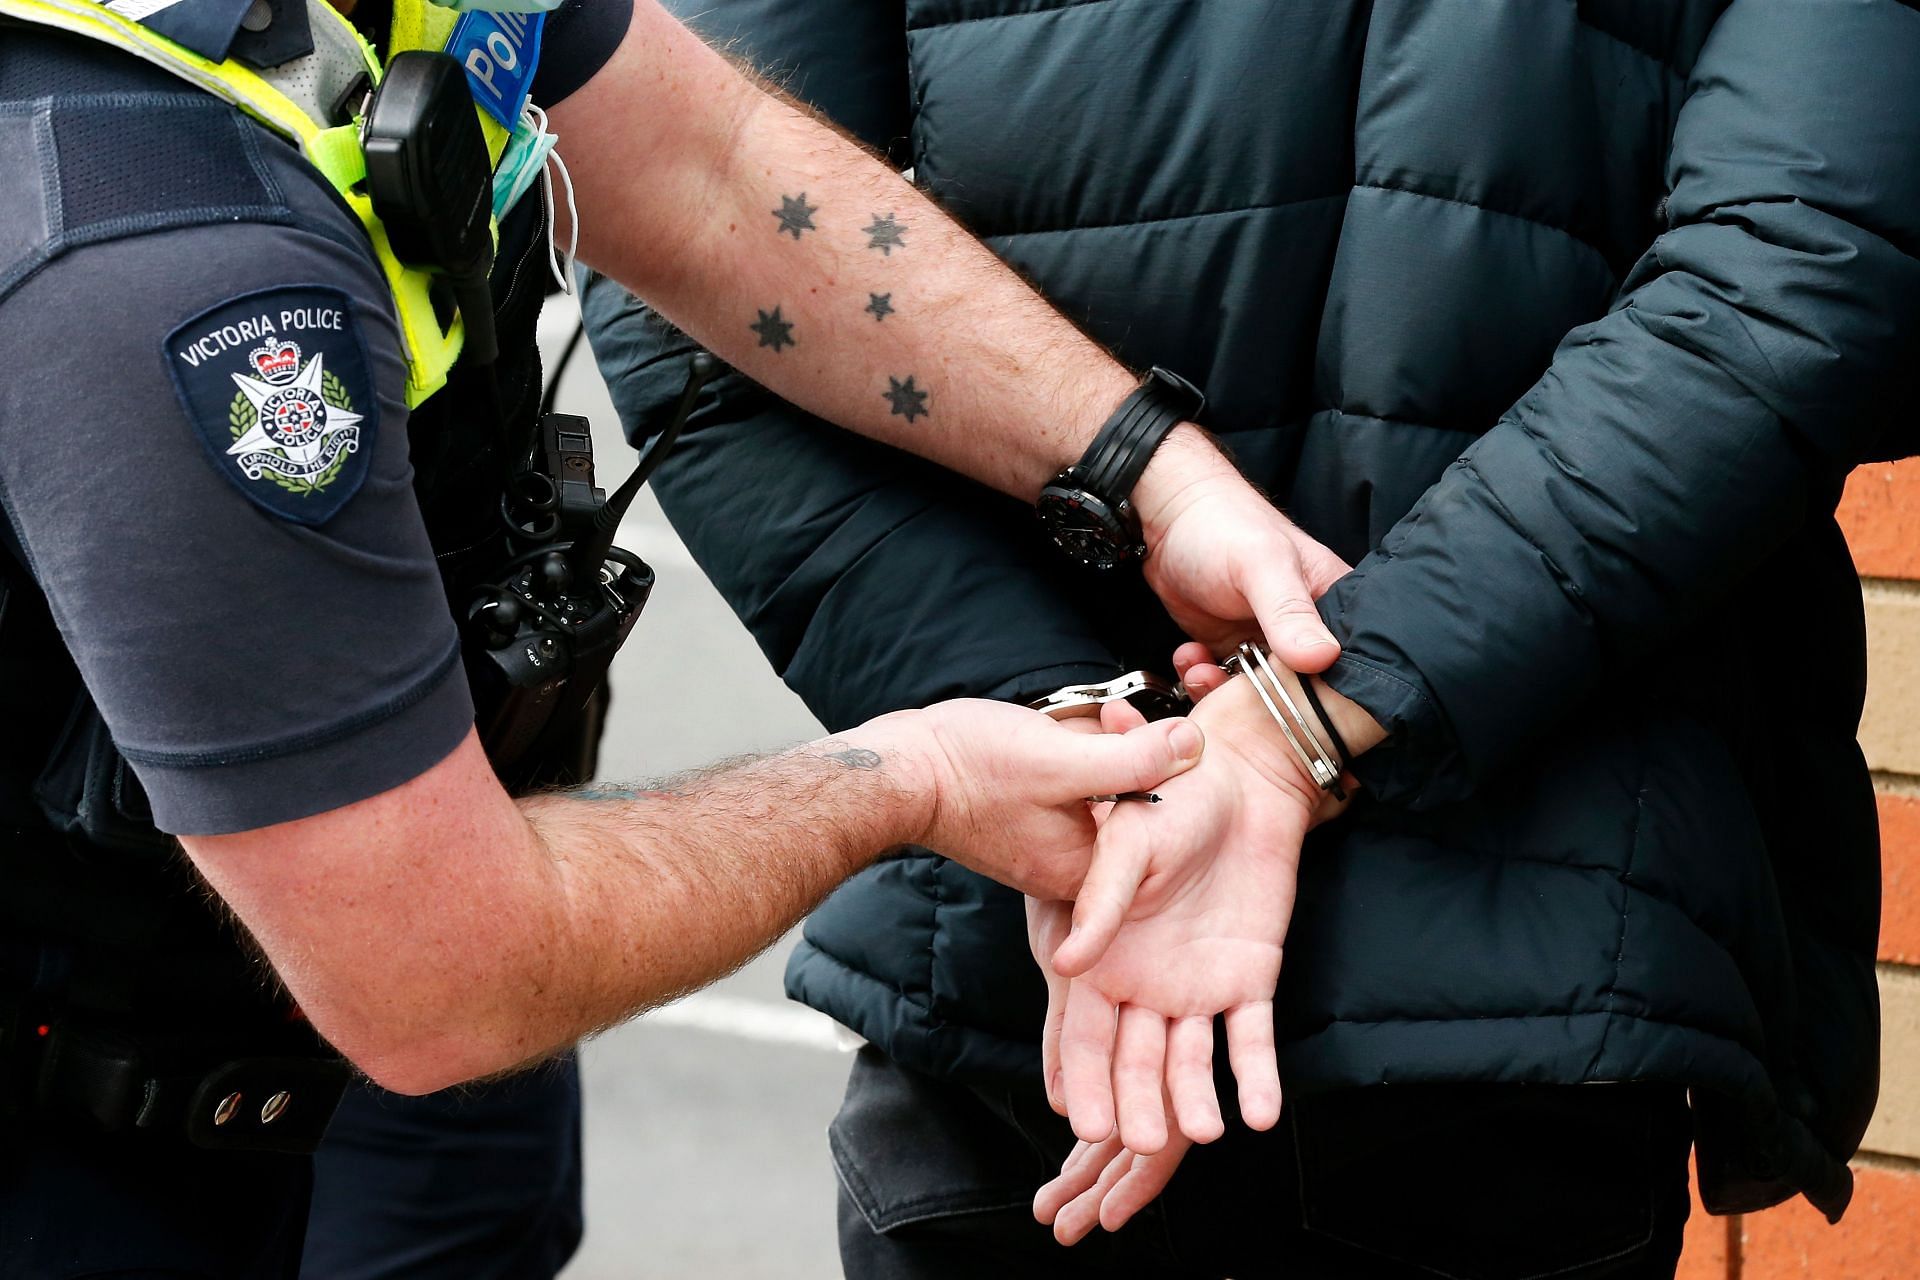 A representative image of the arrest made by the police (Image via Gettty)